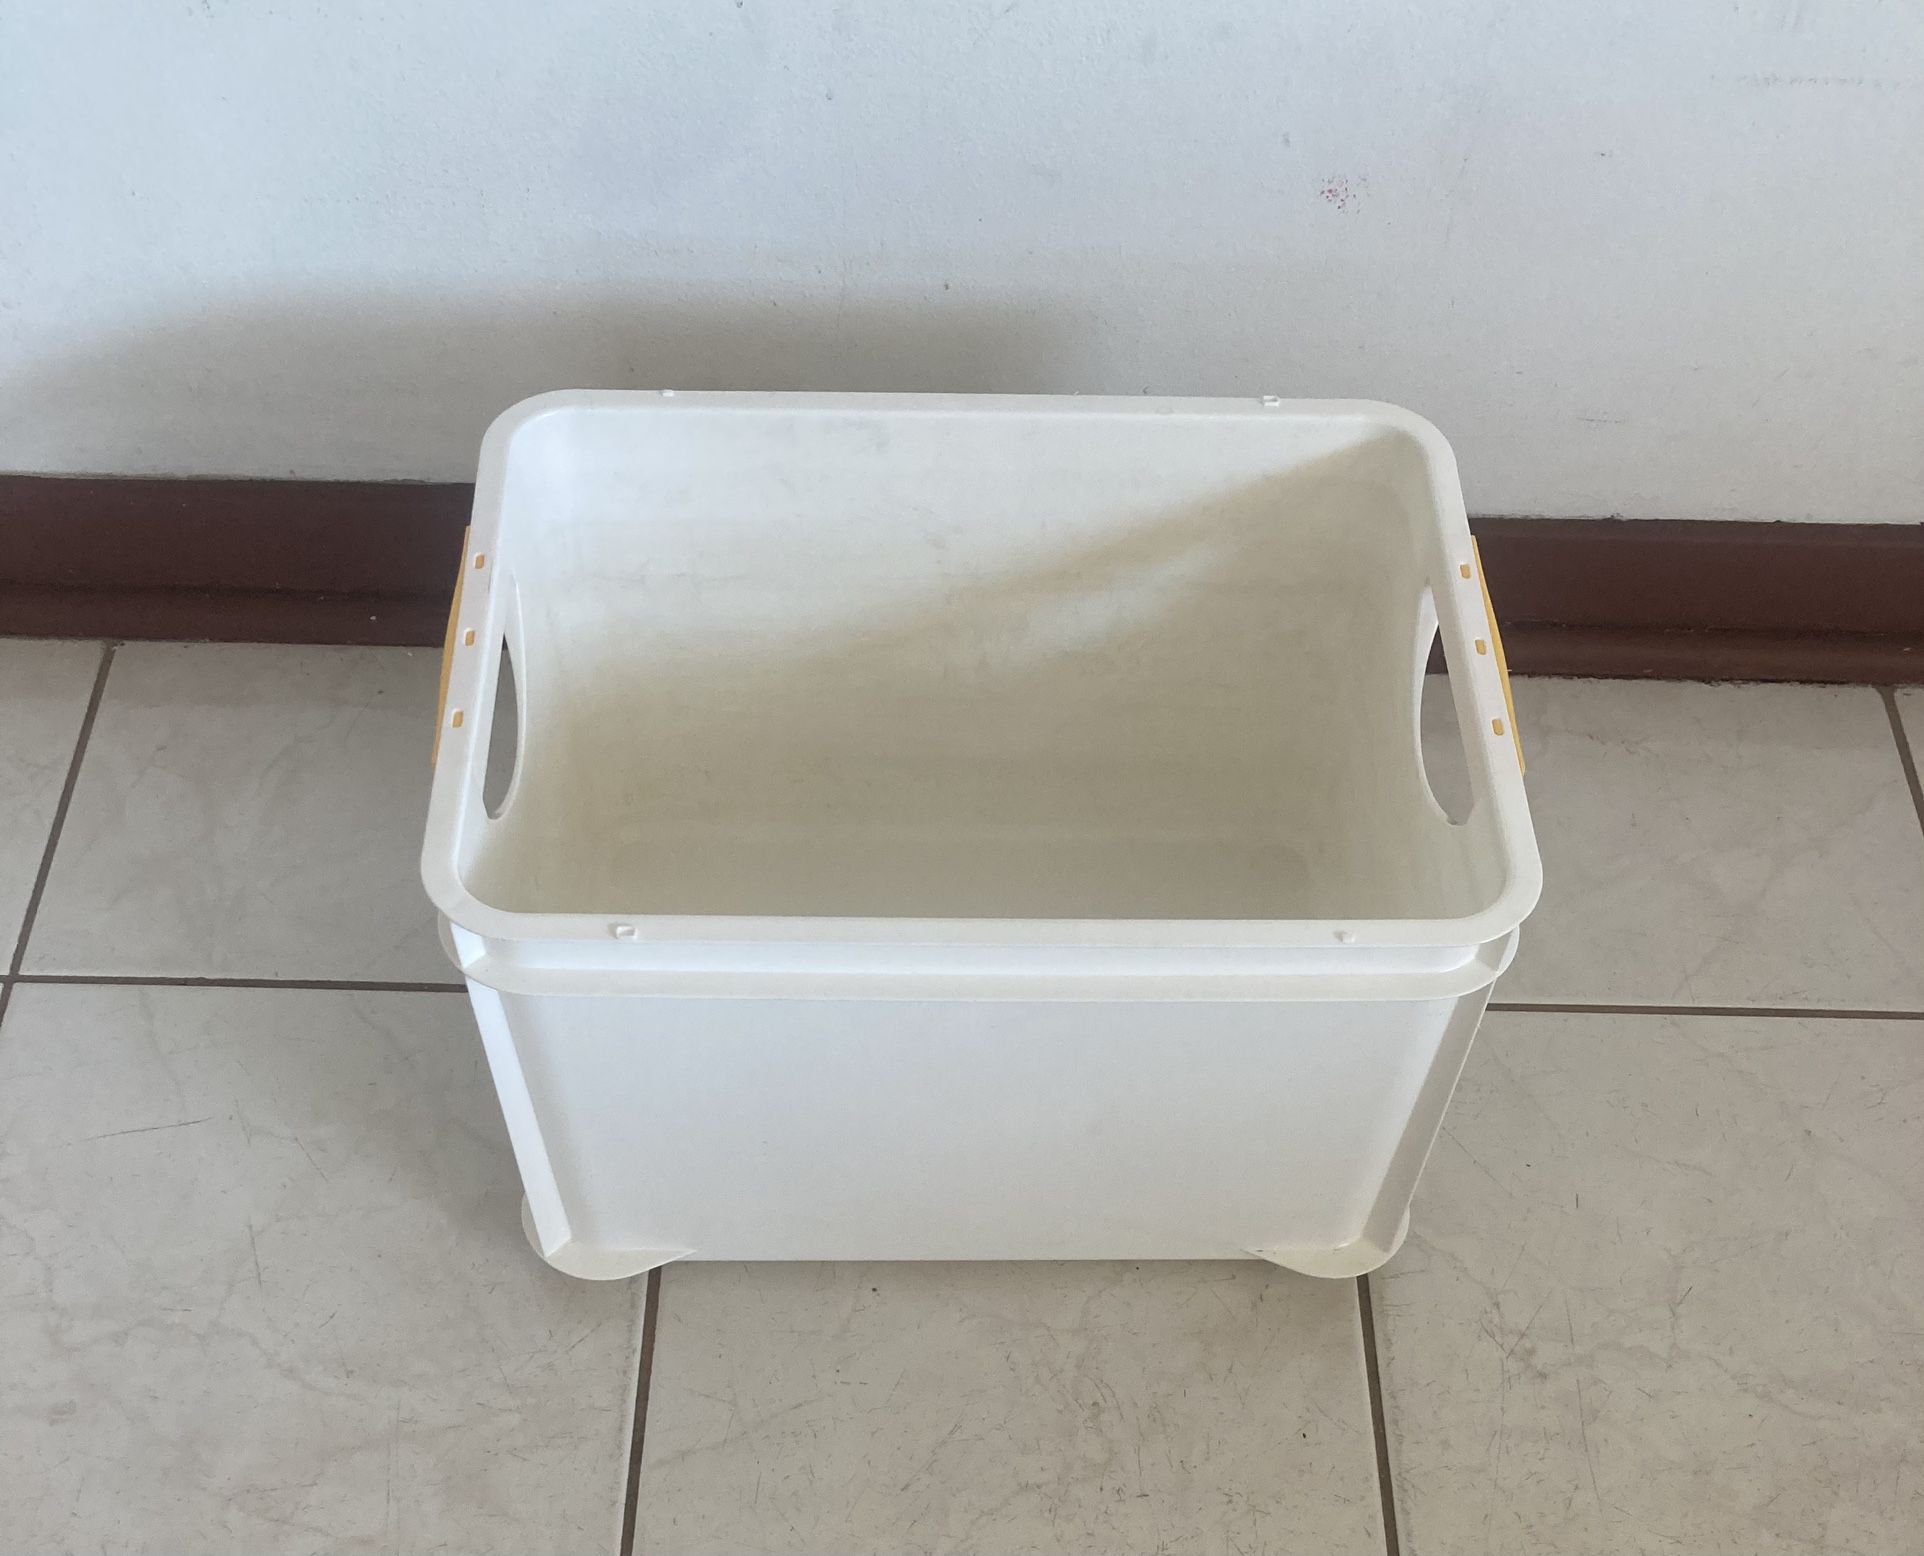 Storage Container With Handles 